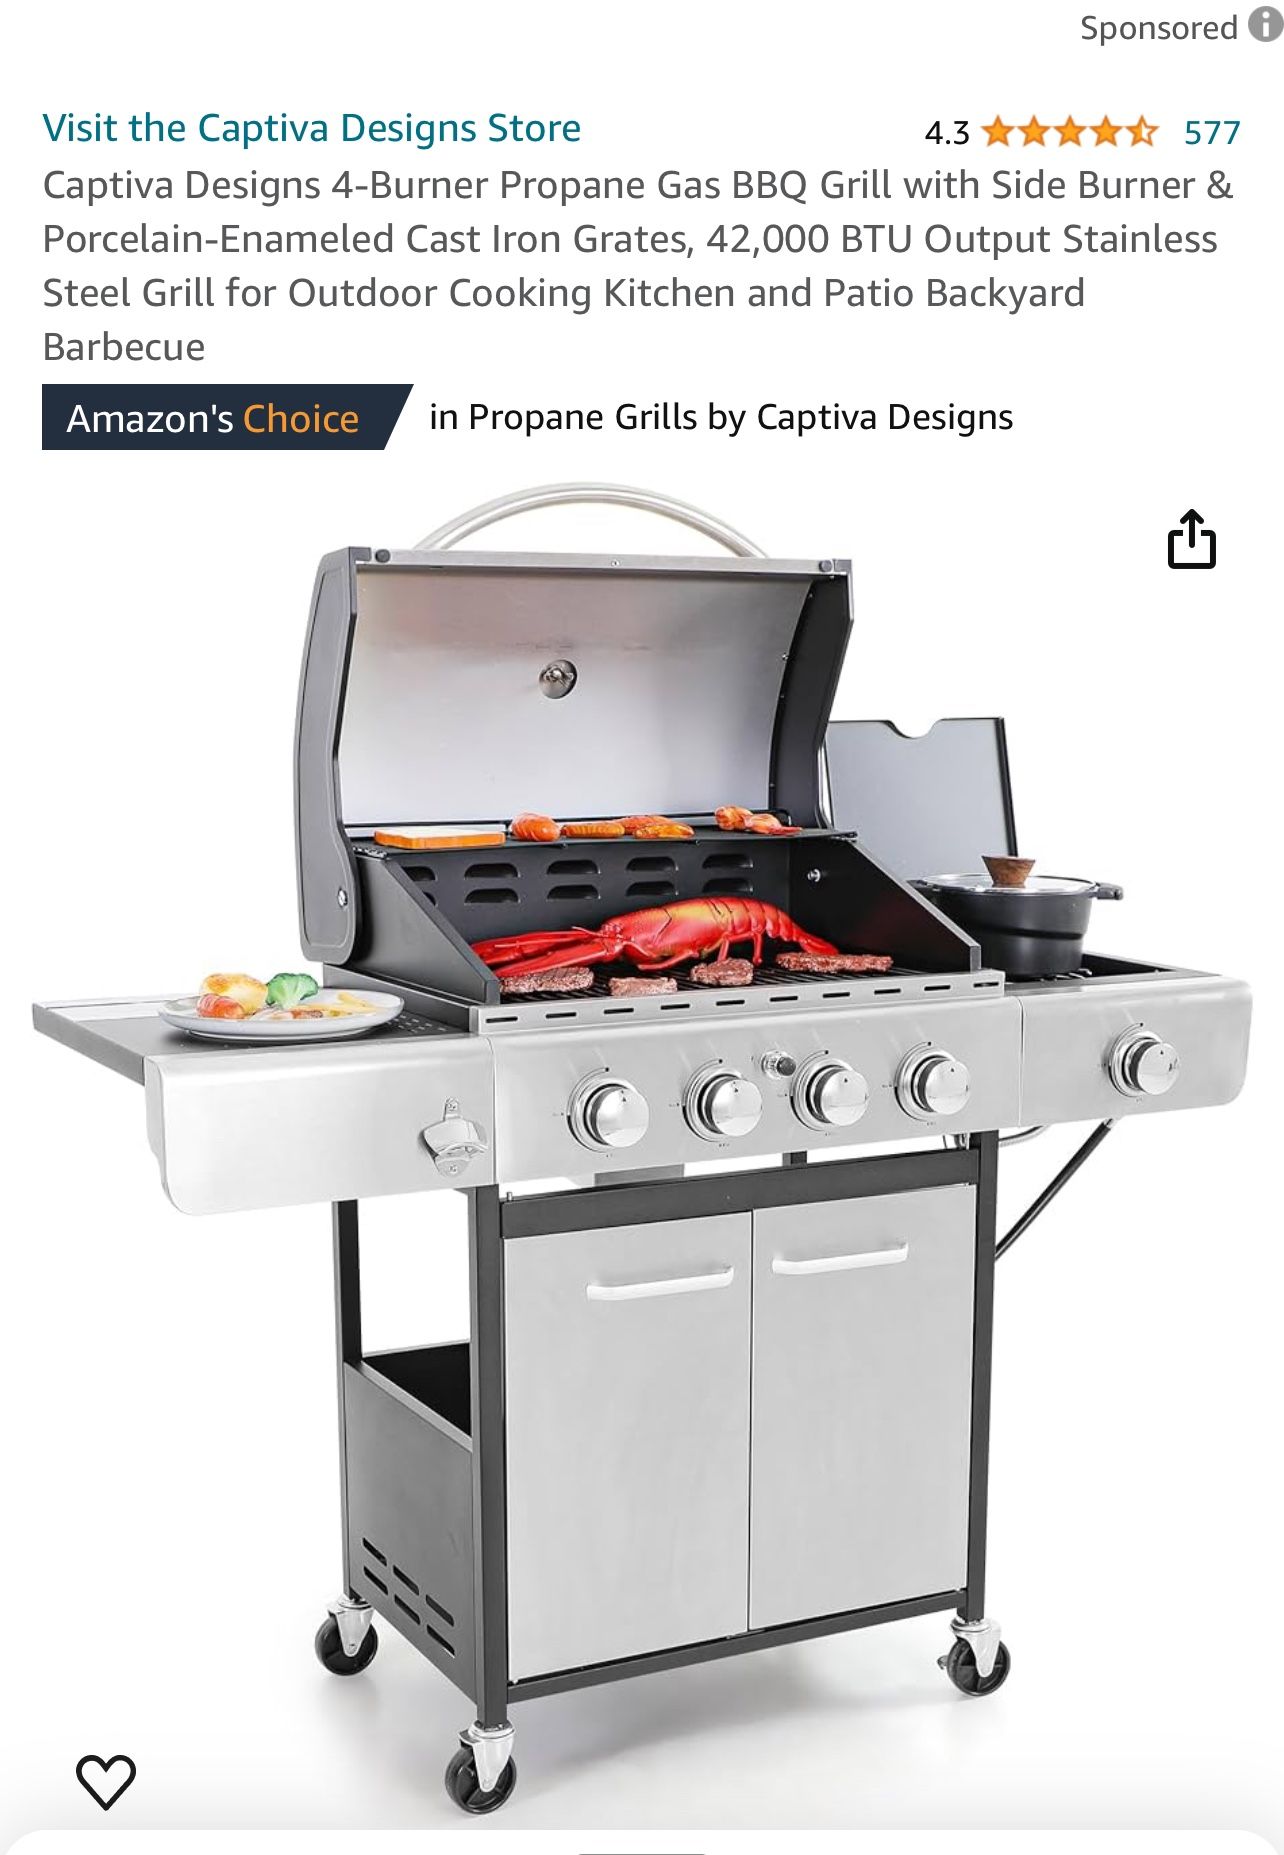 Brand new grill - In box